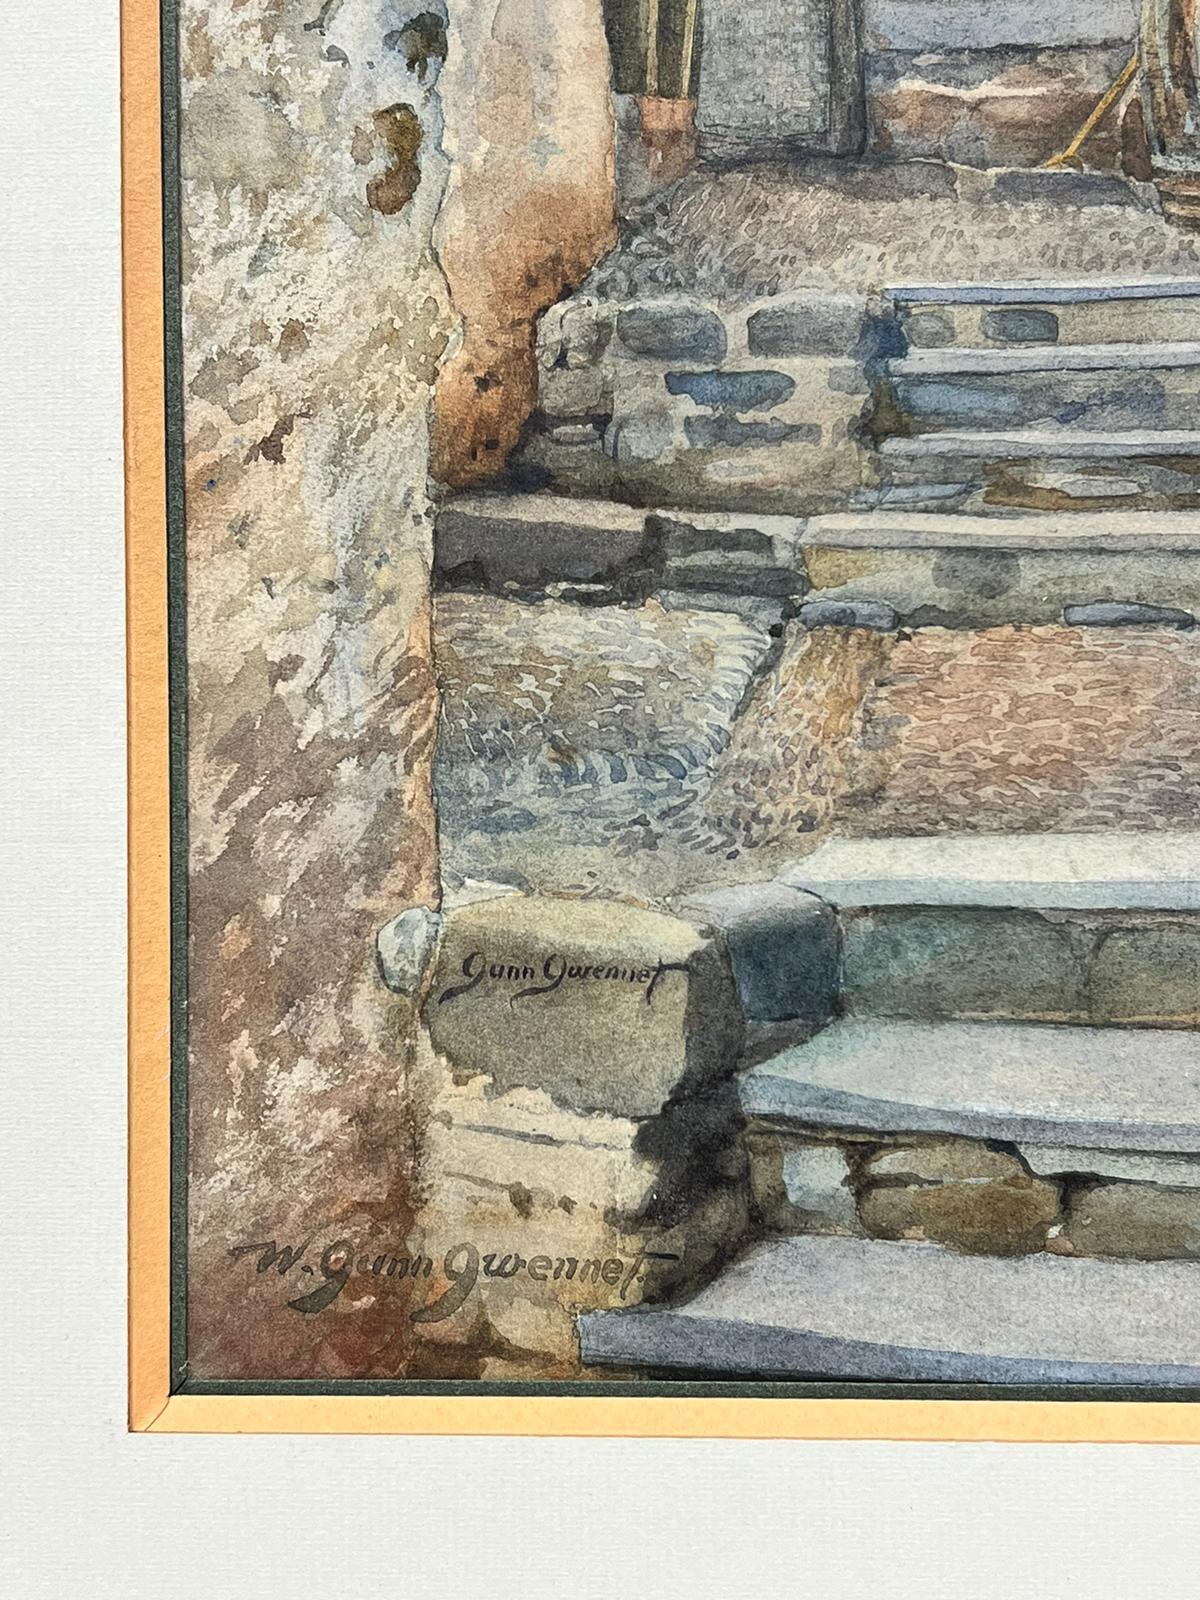 The Cottage Steps
By Gunn Gwennet (British early 1900’s)
signed watercolor painting on paper mounted in a frame.
framed: 21 x 18 inches
Image: 14 x 9.75 inches
provenance: private collection, England 
condition: overall very good